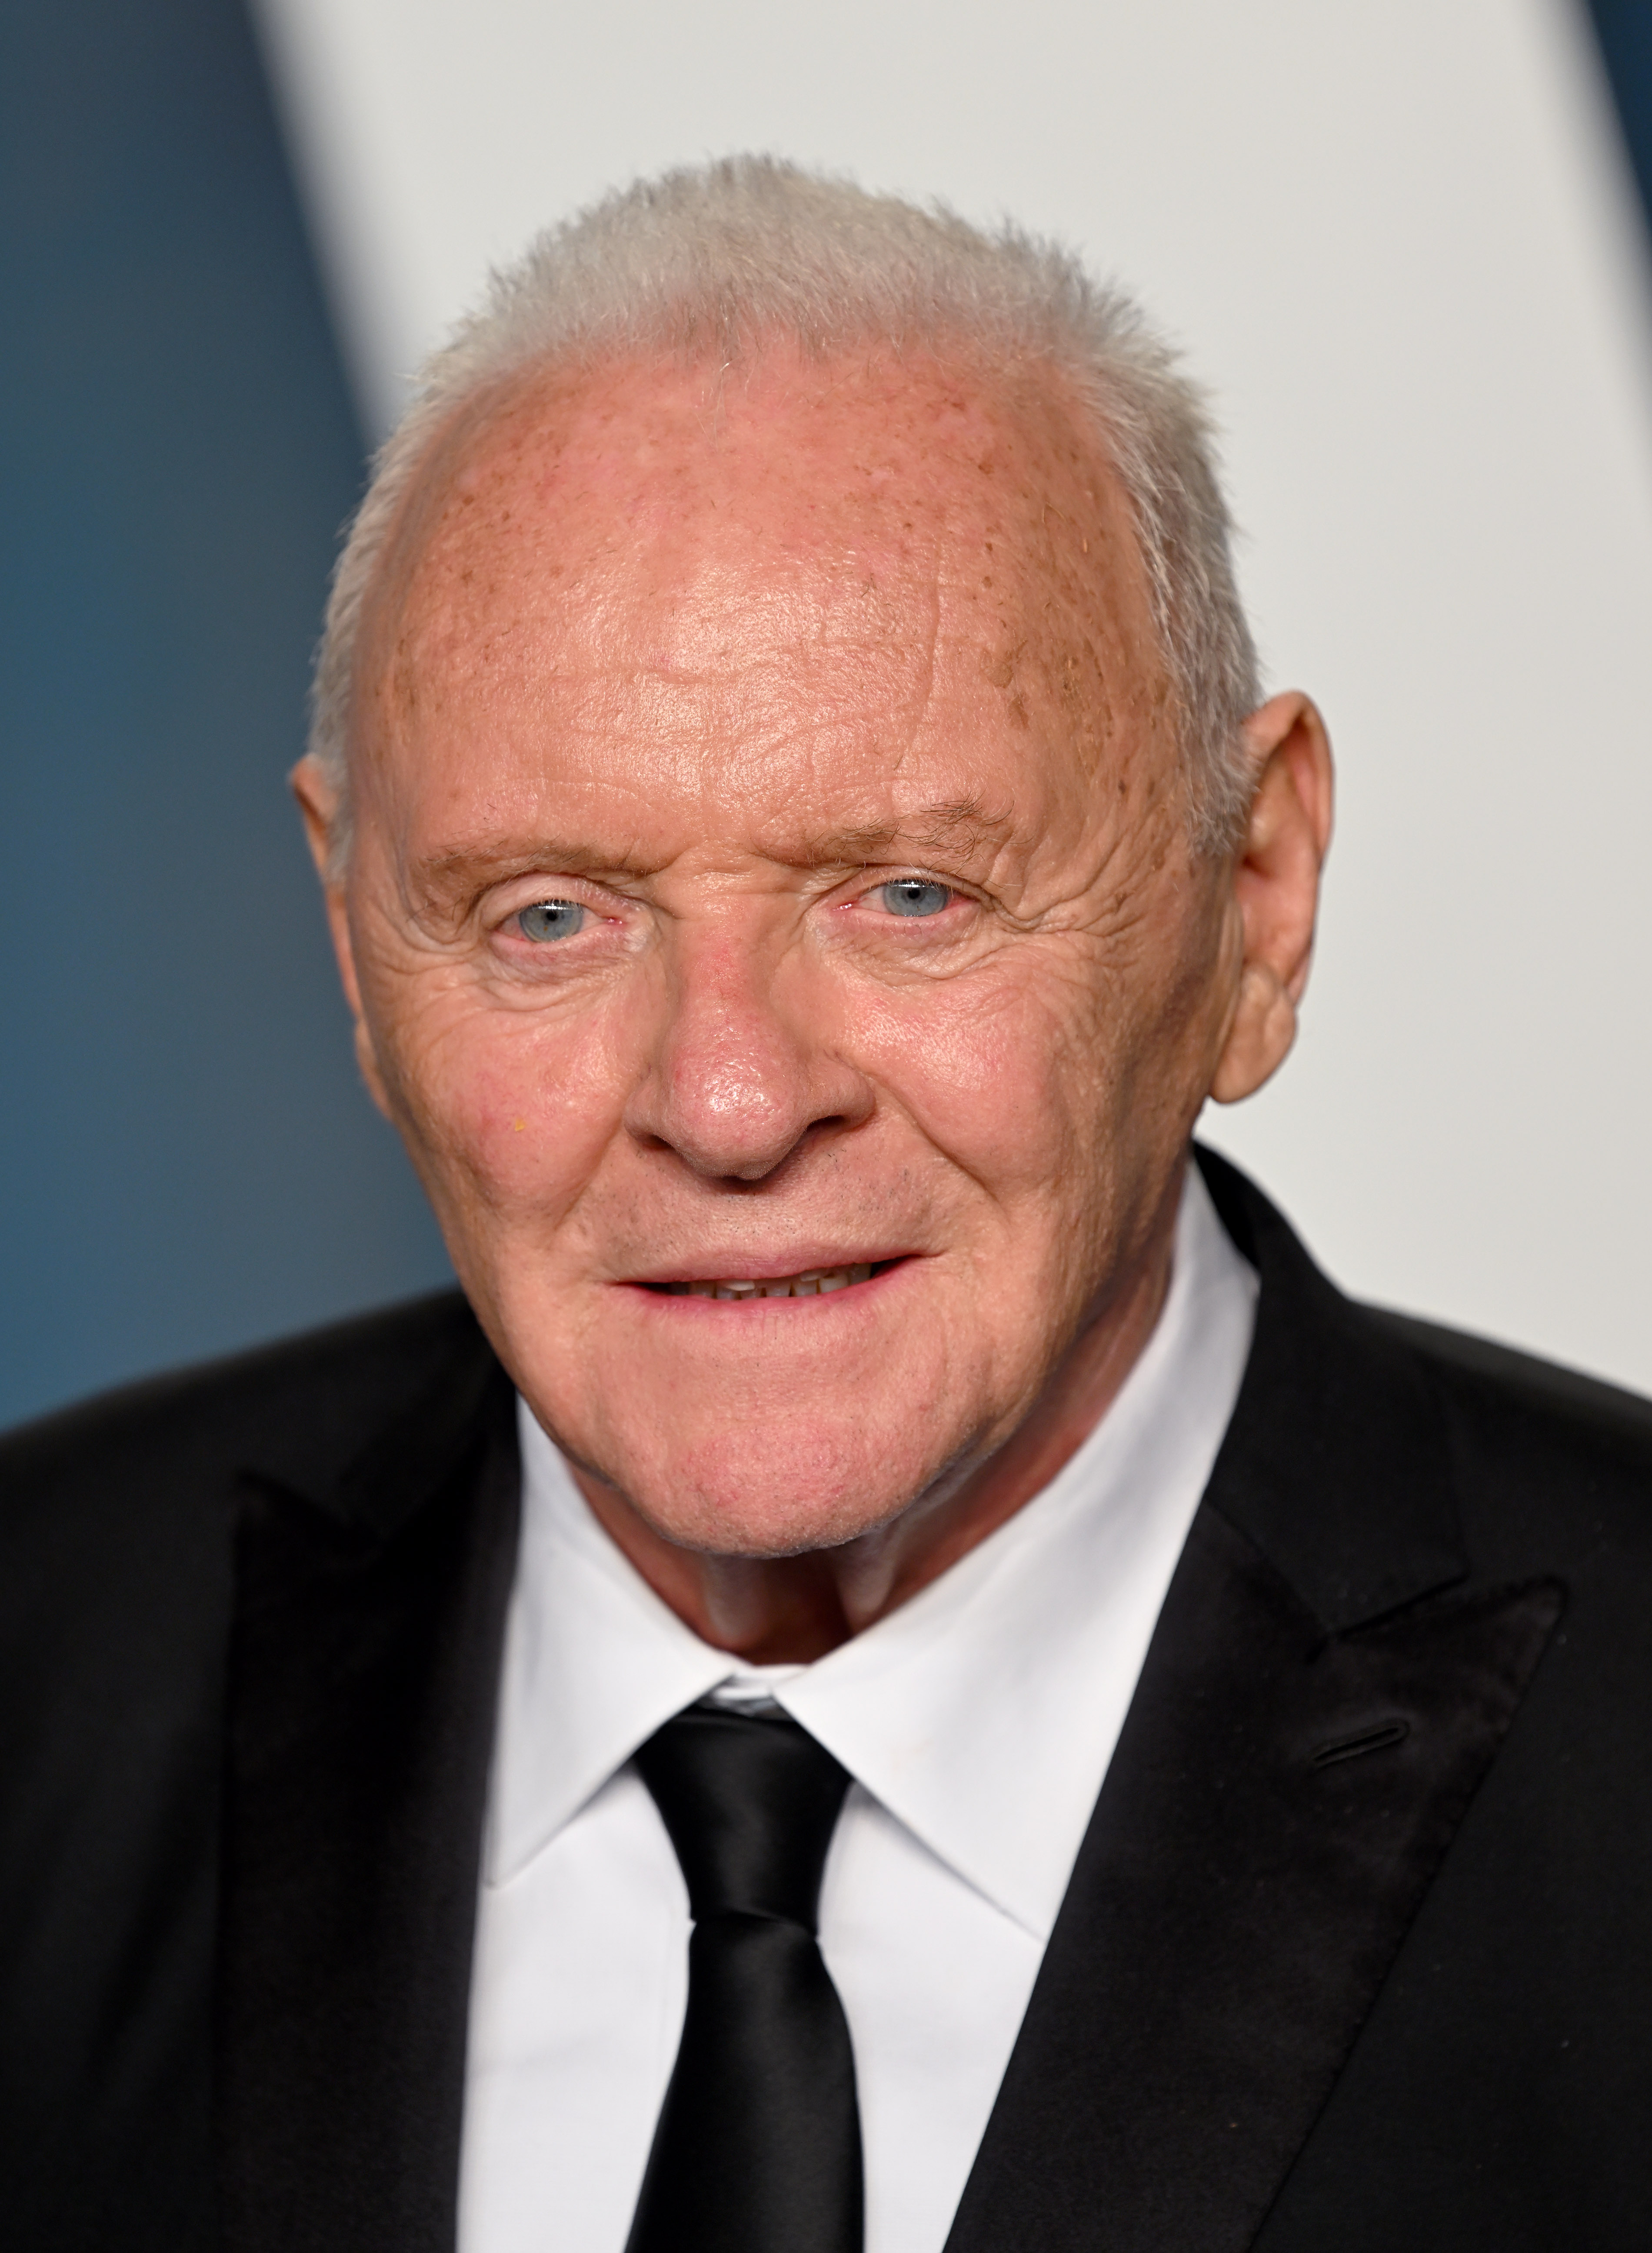 Anthony Hopkins graces the occasion as he attends the 2022 Vanity Fair Oscar Party on March 27, 2022, in the glamorous Beverly Hills, California | Source: Getty Images